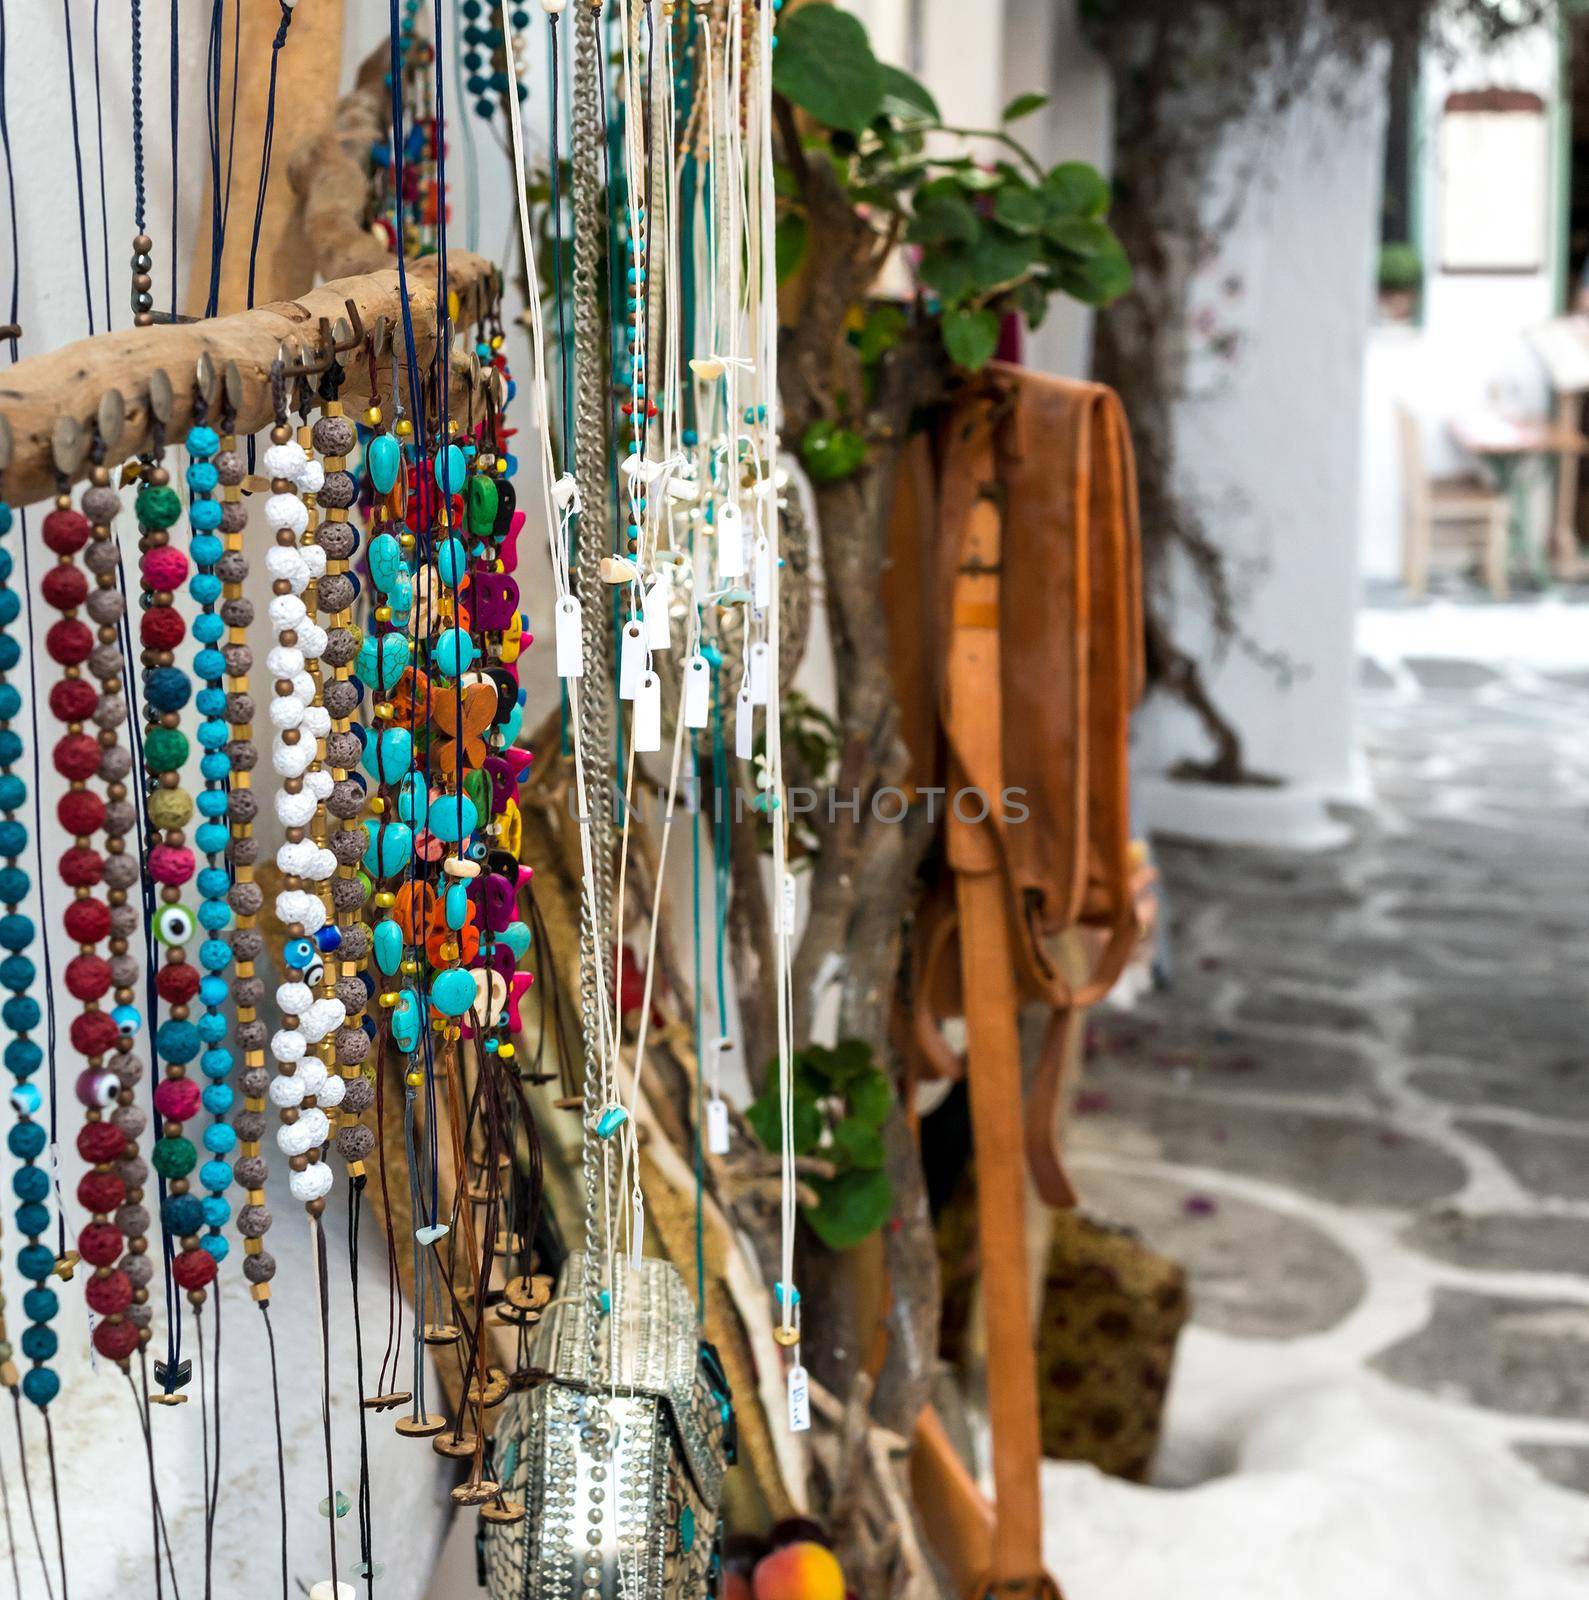 Jewelry and accessories at the street market in Greece by tan4ikk1